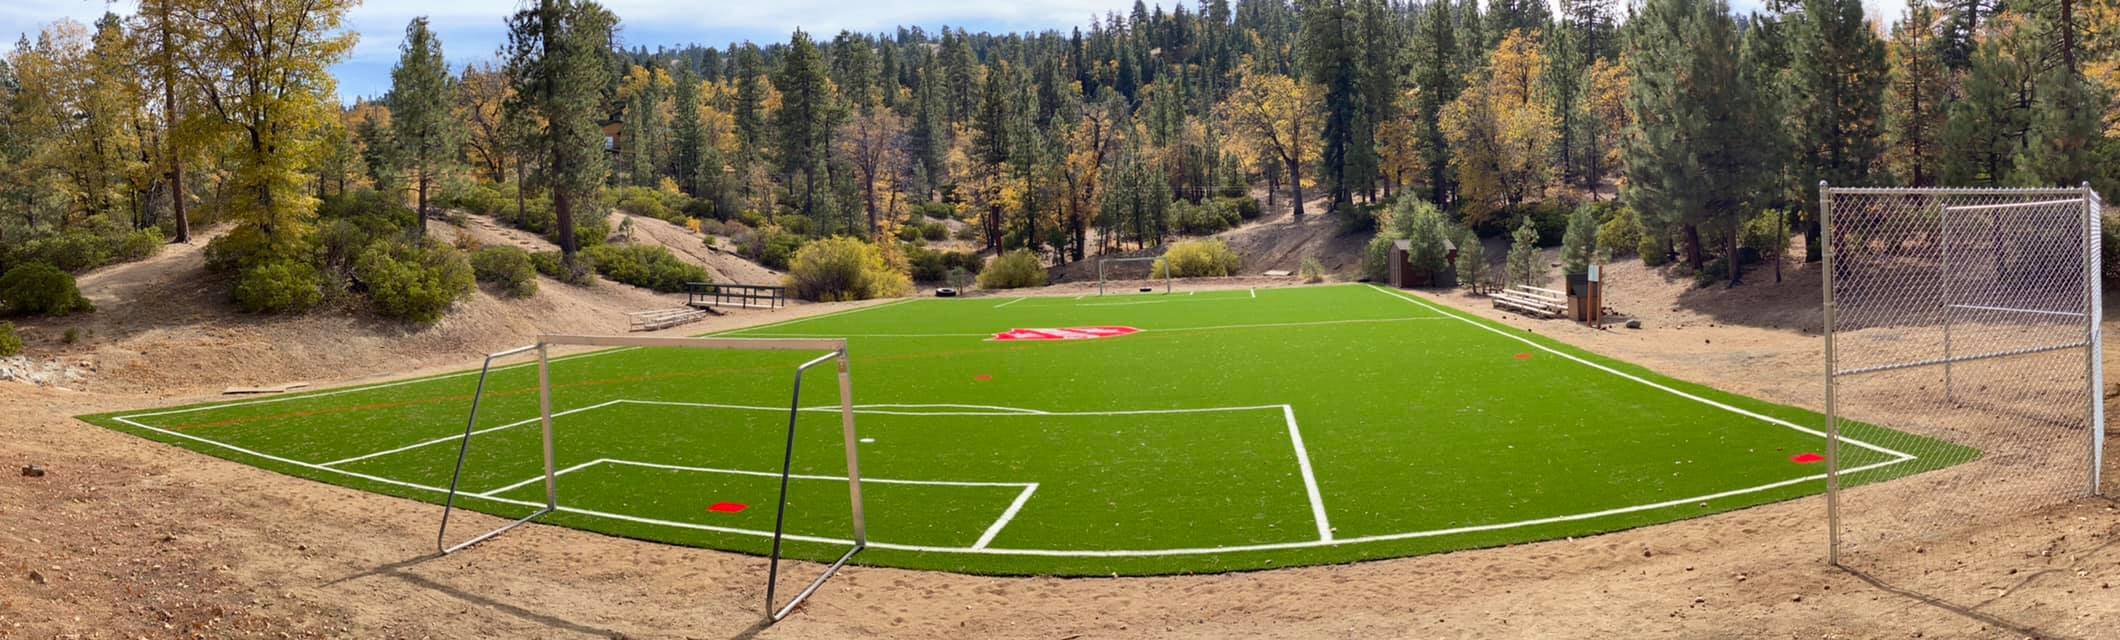 Artificial Sports Turf, Athletic Turf, Indoor & Outdoor Sports Area, Riverside